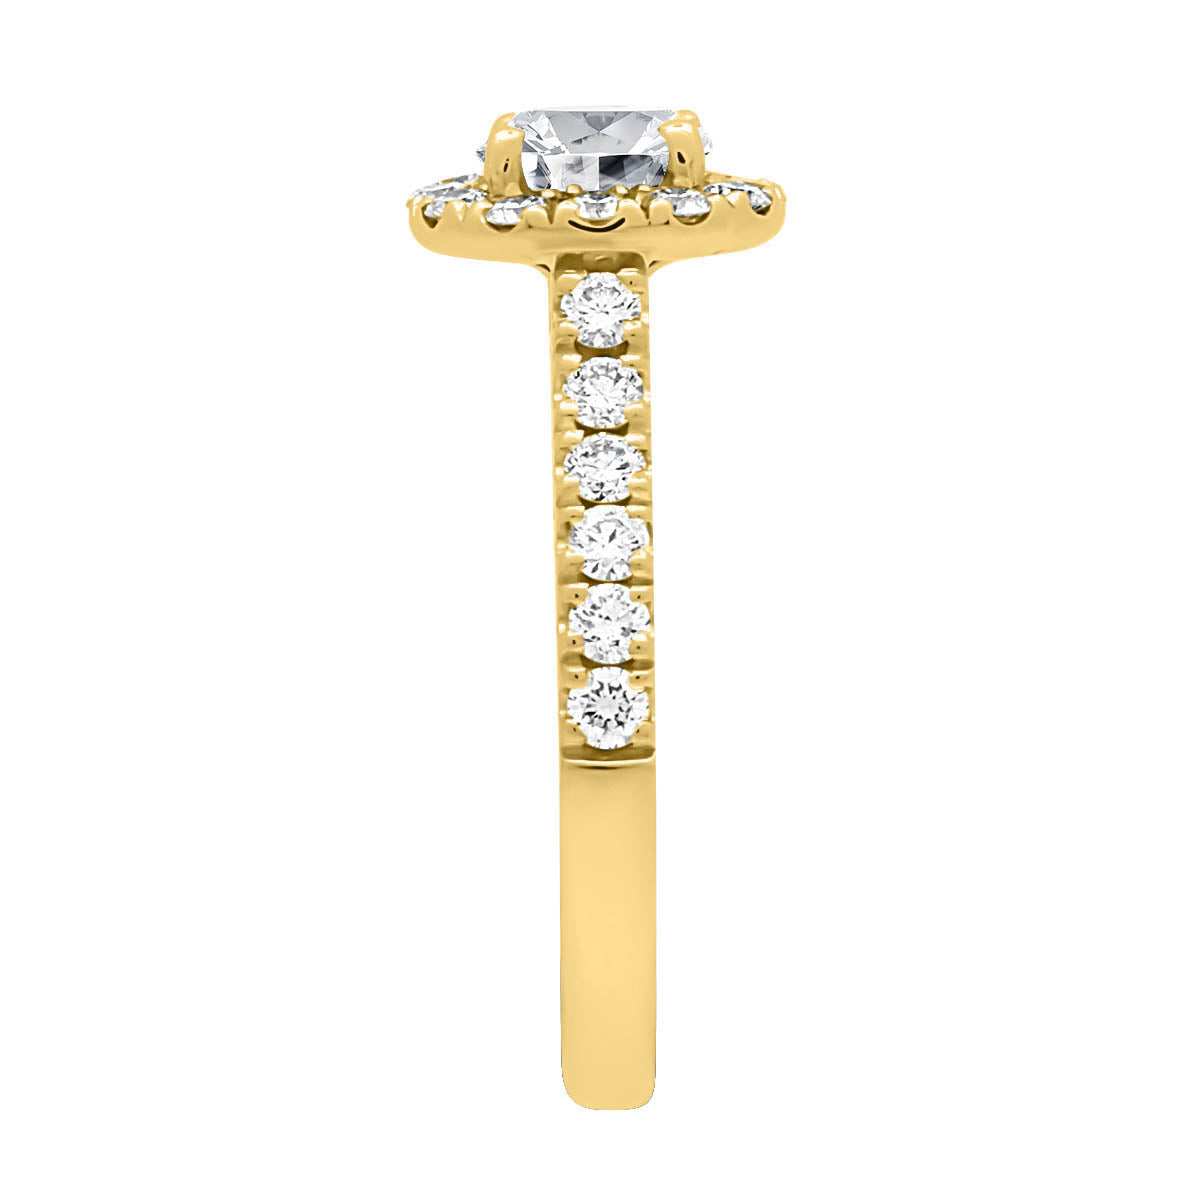 Halo Engagement Ring Diamond Band in yellow gold  upright and from the side view